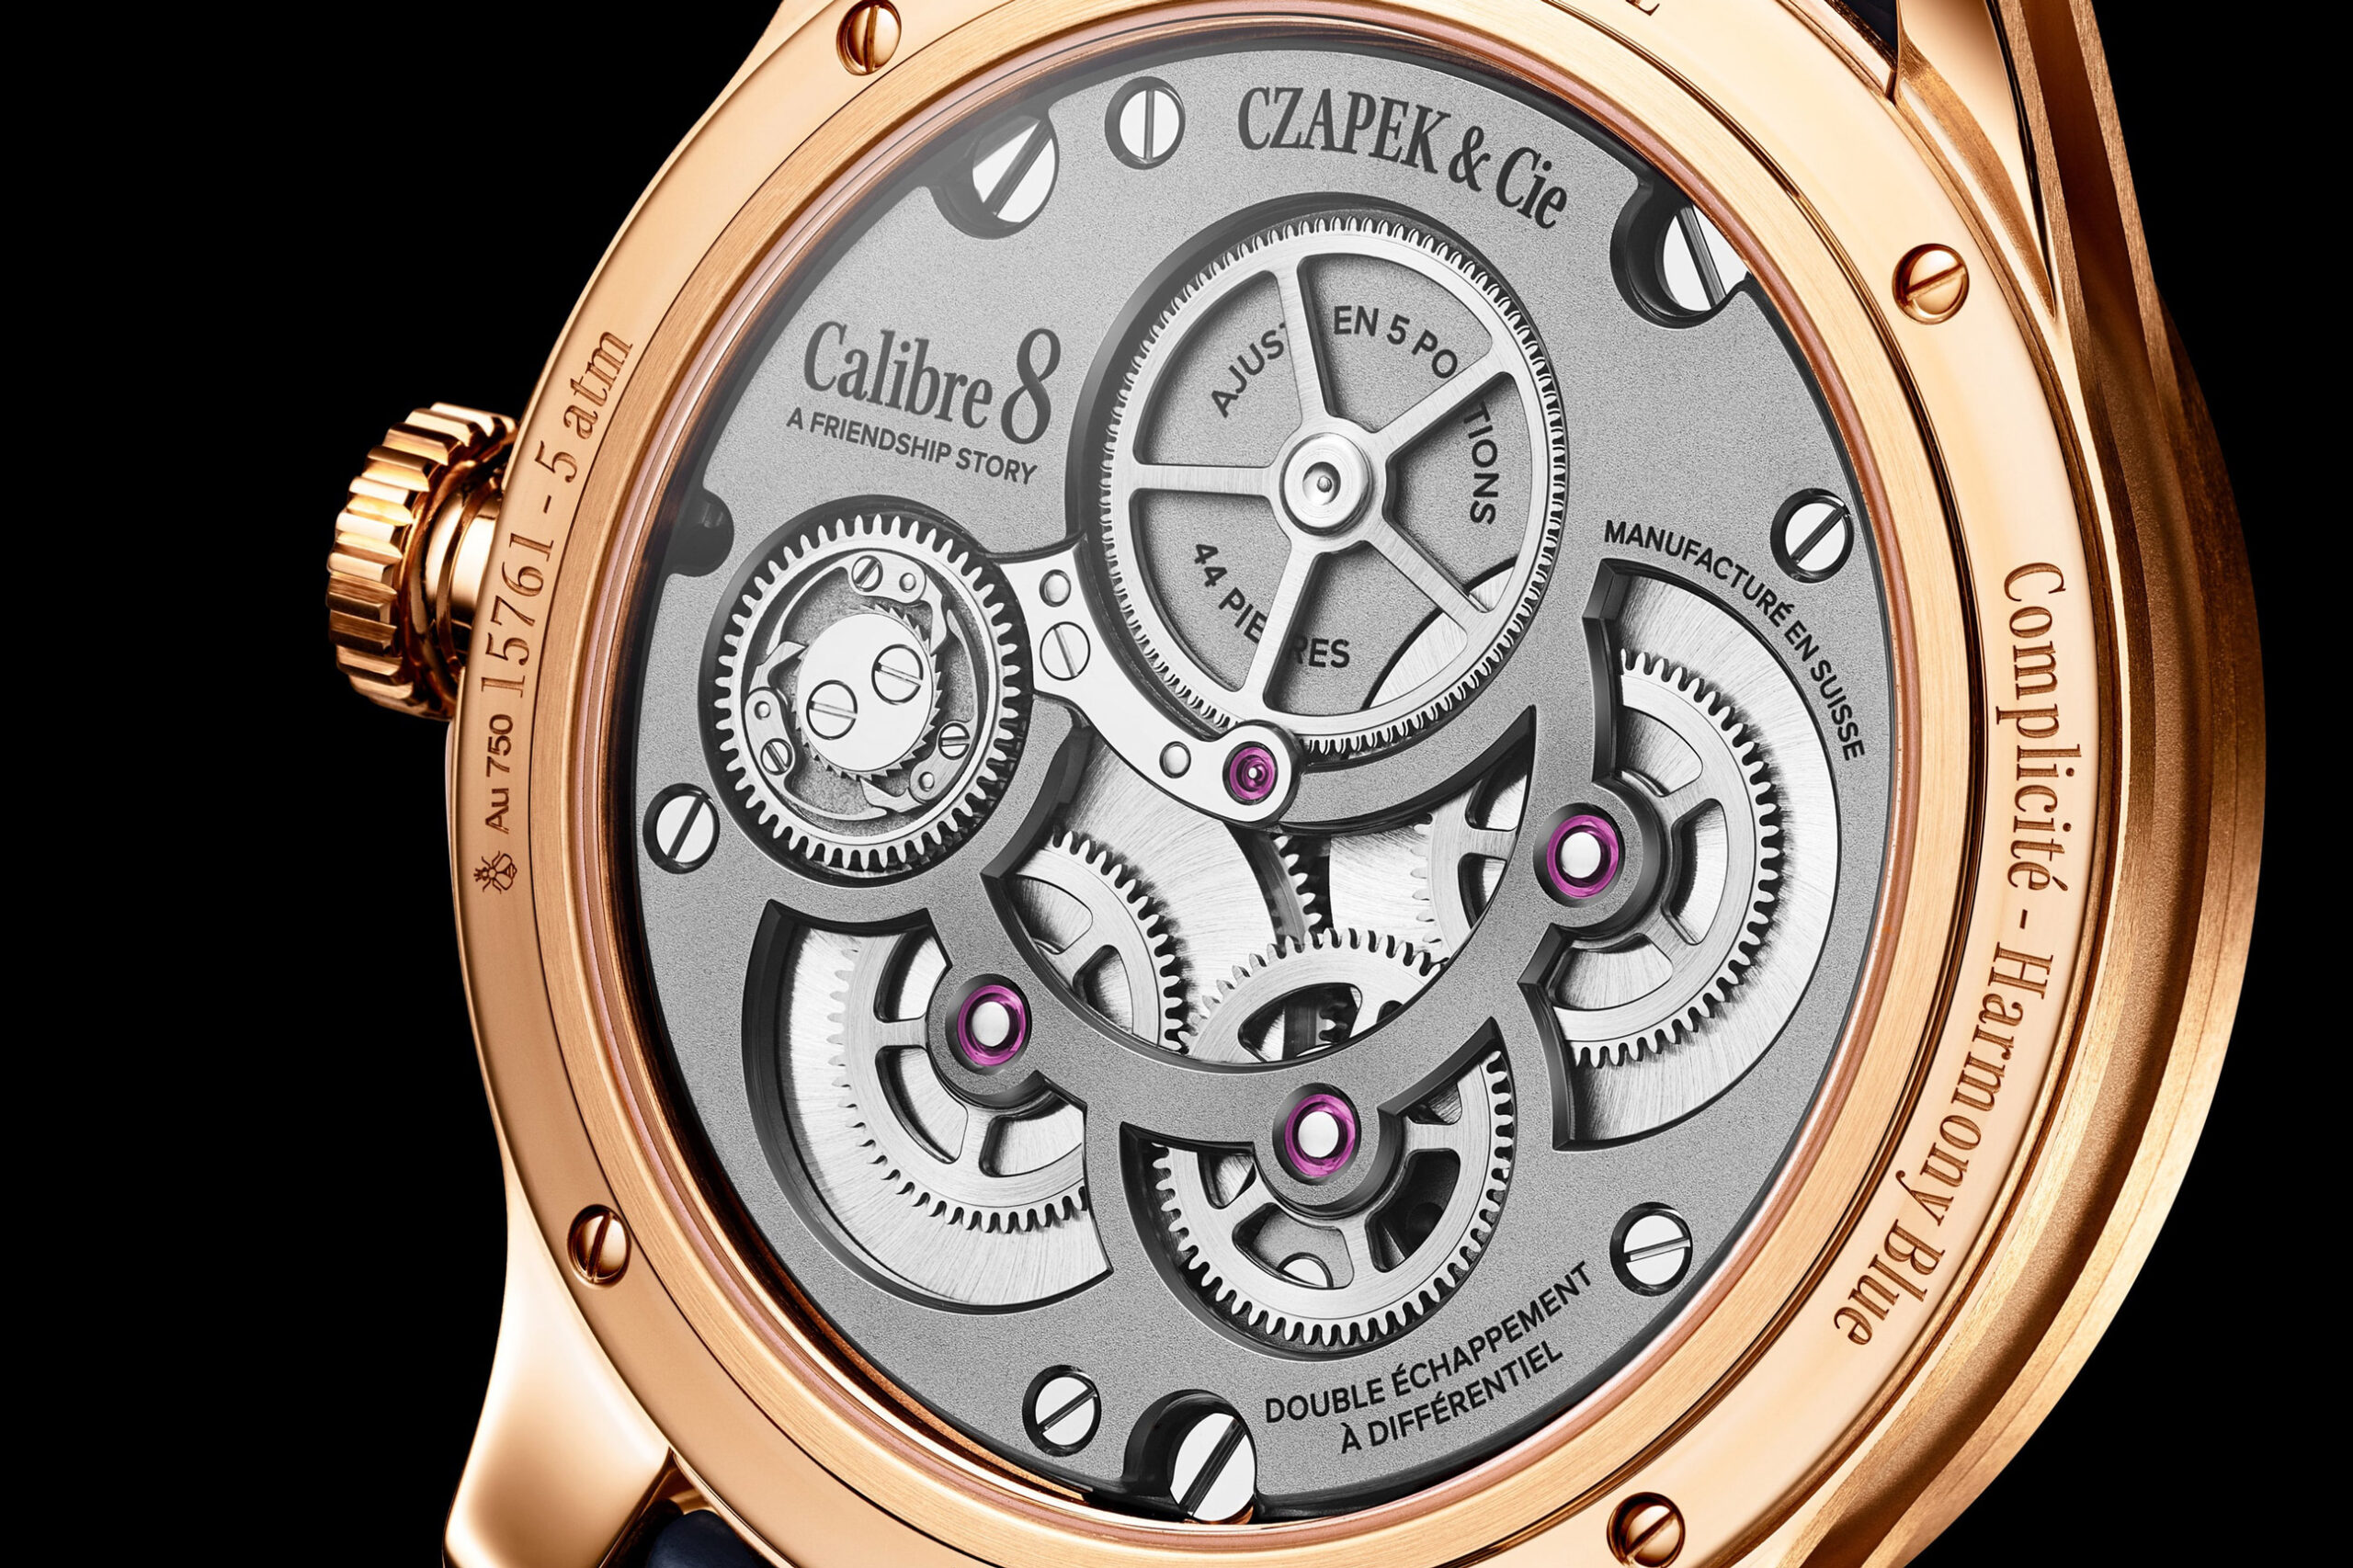 The Calibre 8 created in collaboration with Bernard Lederer.